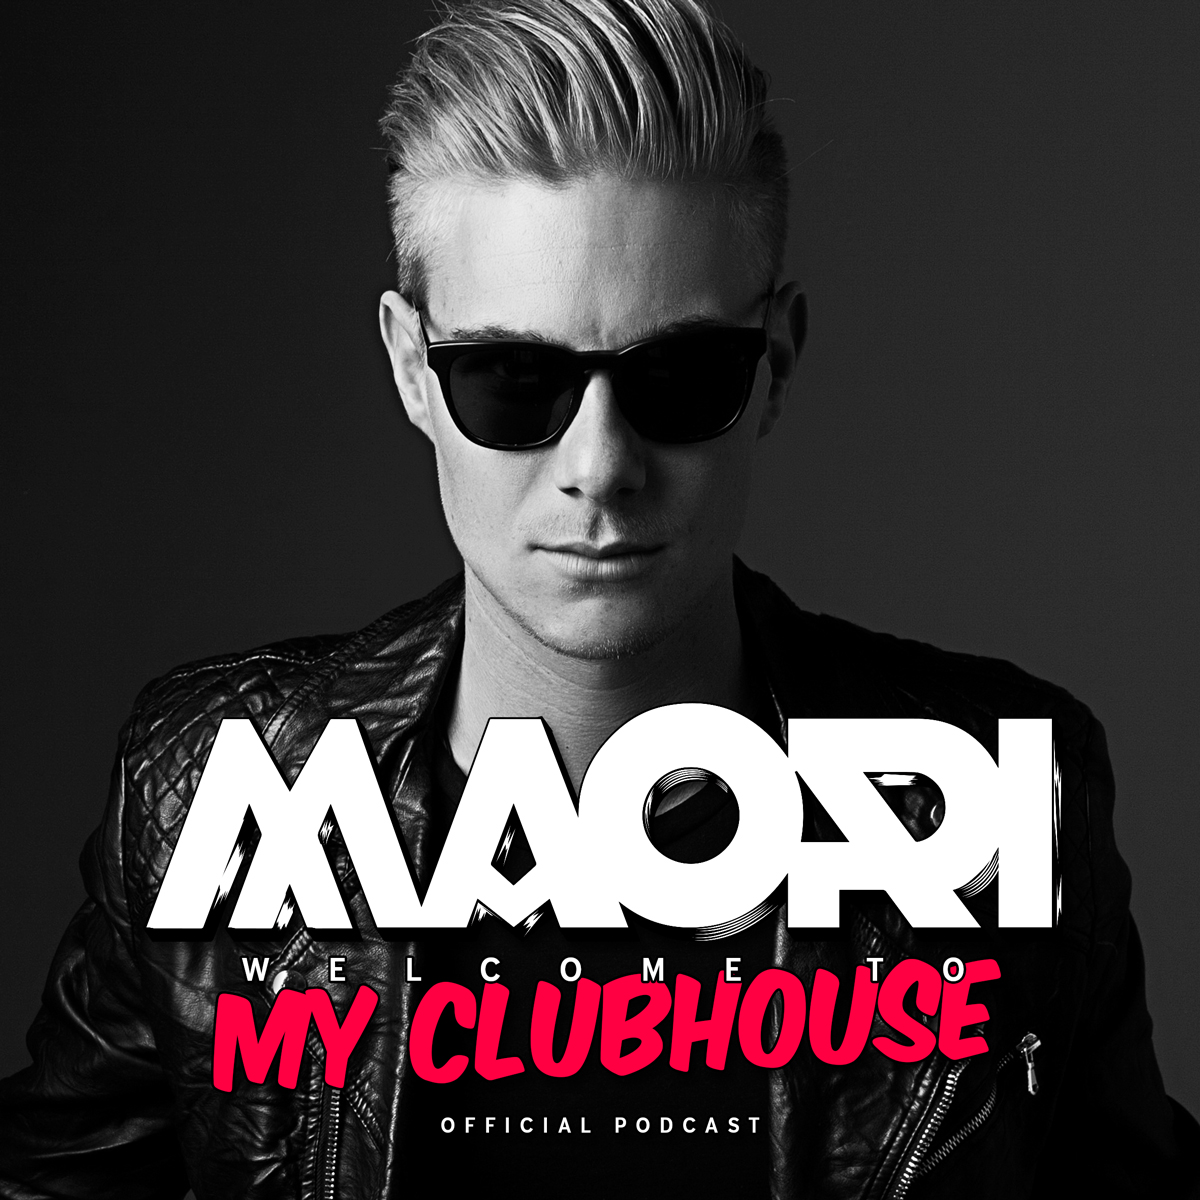 My Clubhouse by Maori - Podcast #034 